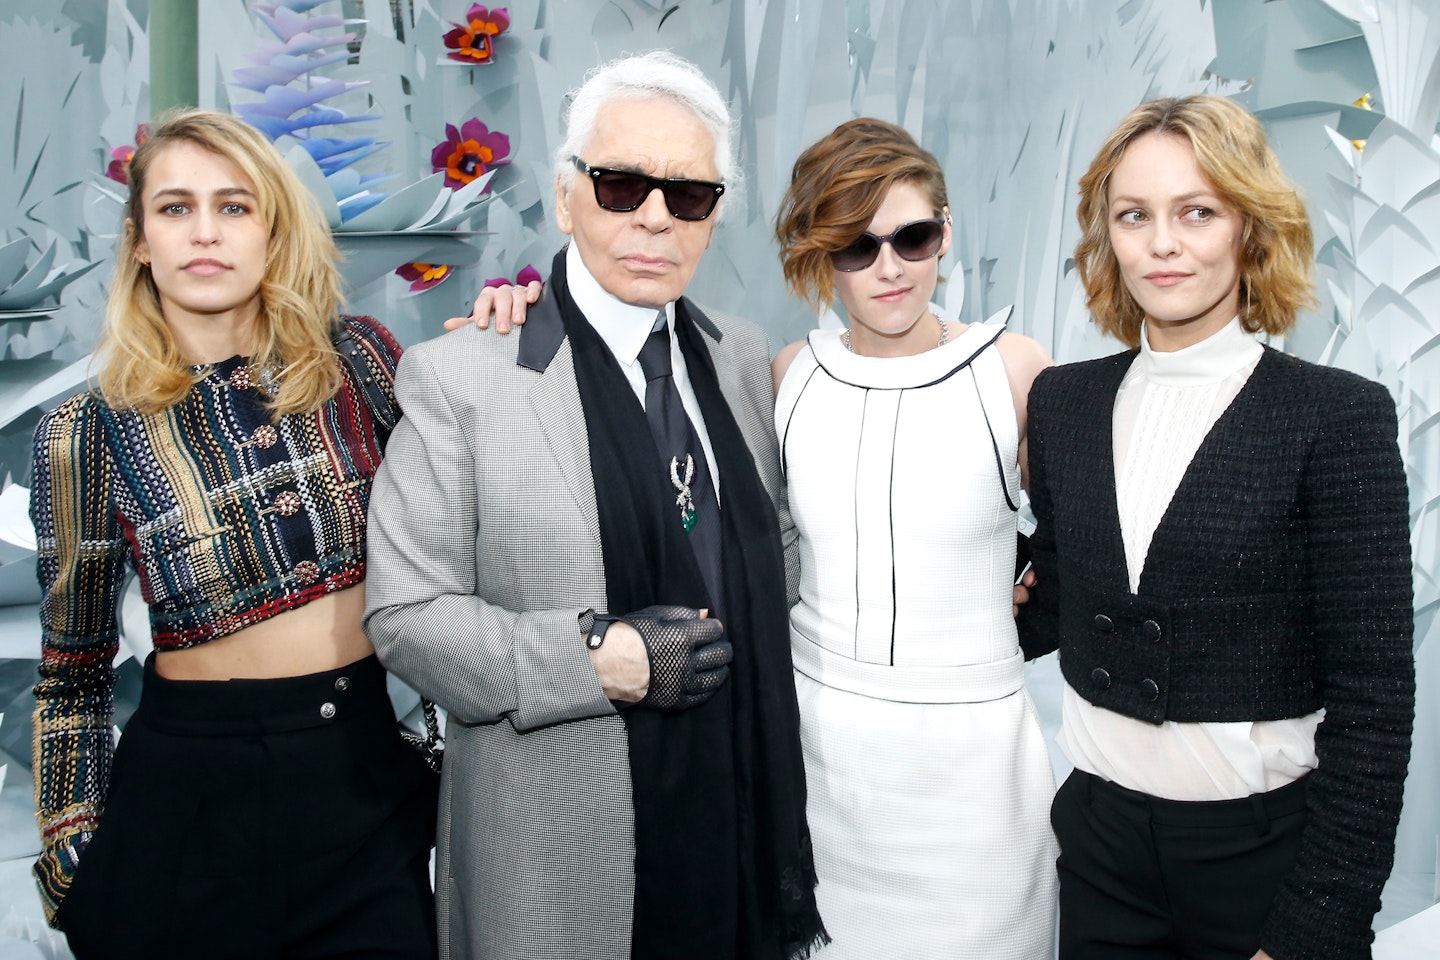 Kristen Stewart To Star In A Chanel Campaign With Vanessa Paradis